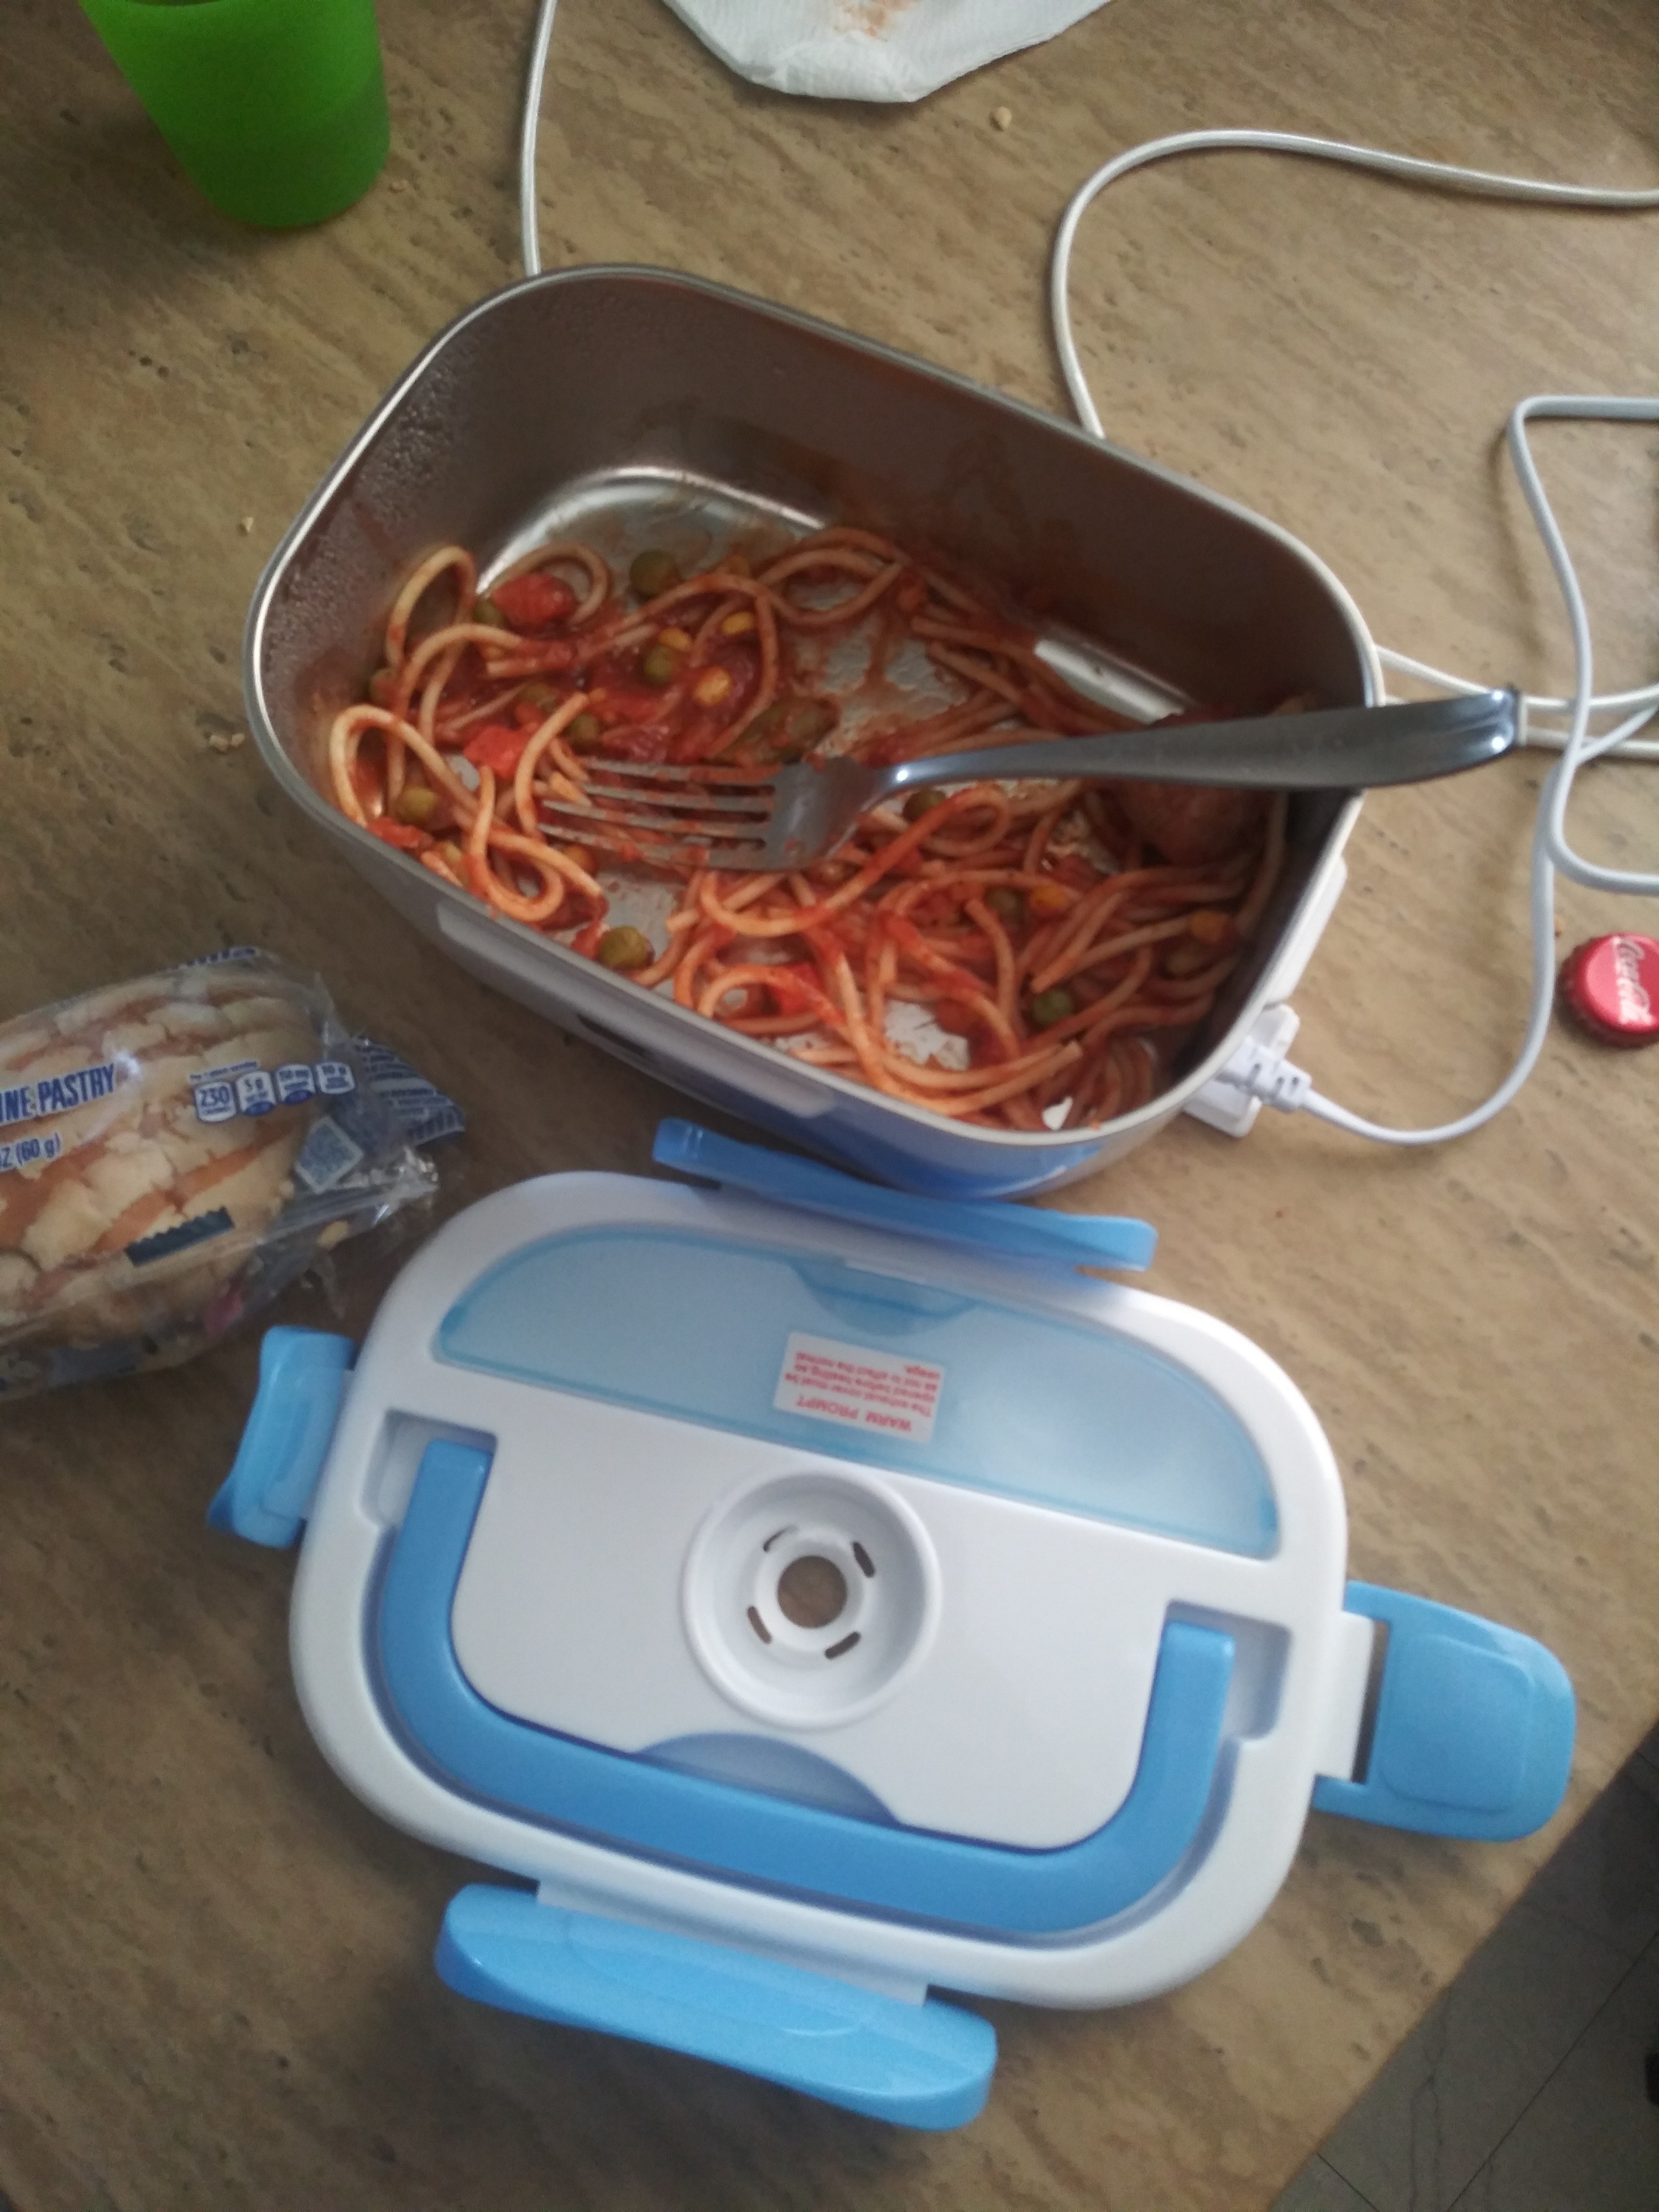 A reviewer&#x27;s blue and white electric lunch box with spaghetti in it that appears to be plugged in